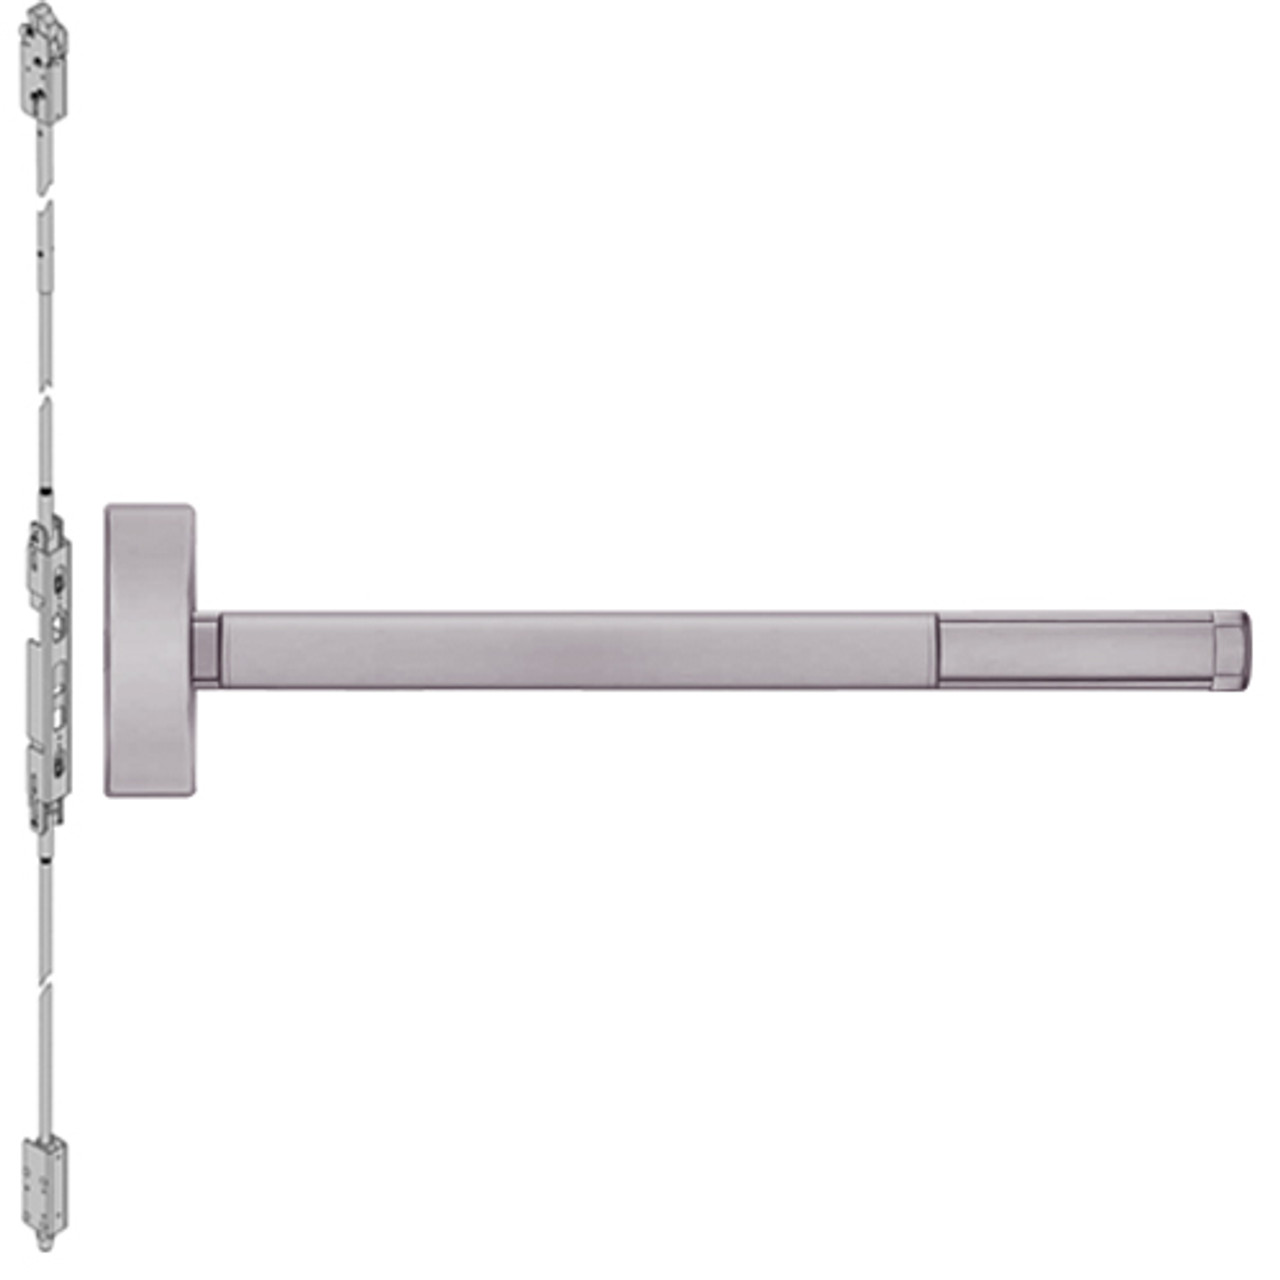 DEFL2801-630-48 PHI 2800 Series Fire Rated Concealed Vertical Rod Exit Device with Delayed Egress Prepped for Cover Plate in Satin Stainless Steel Finish